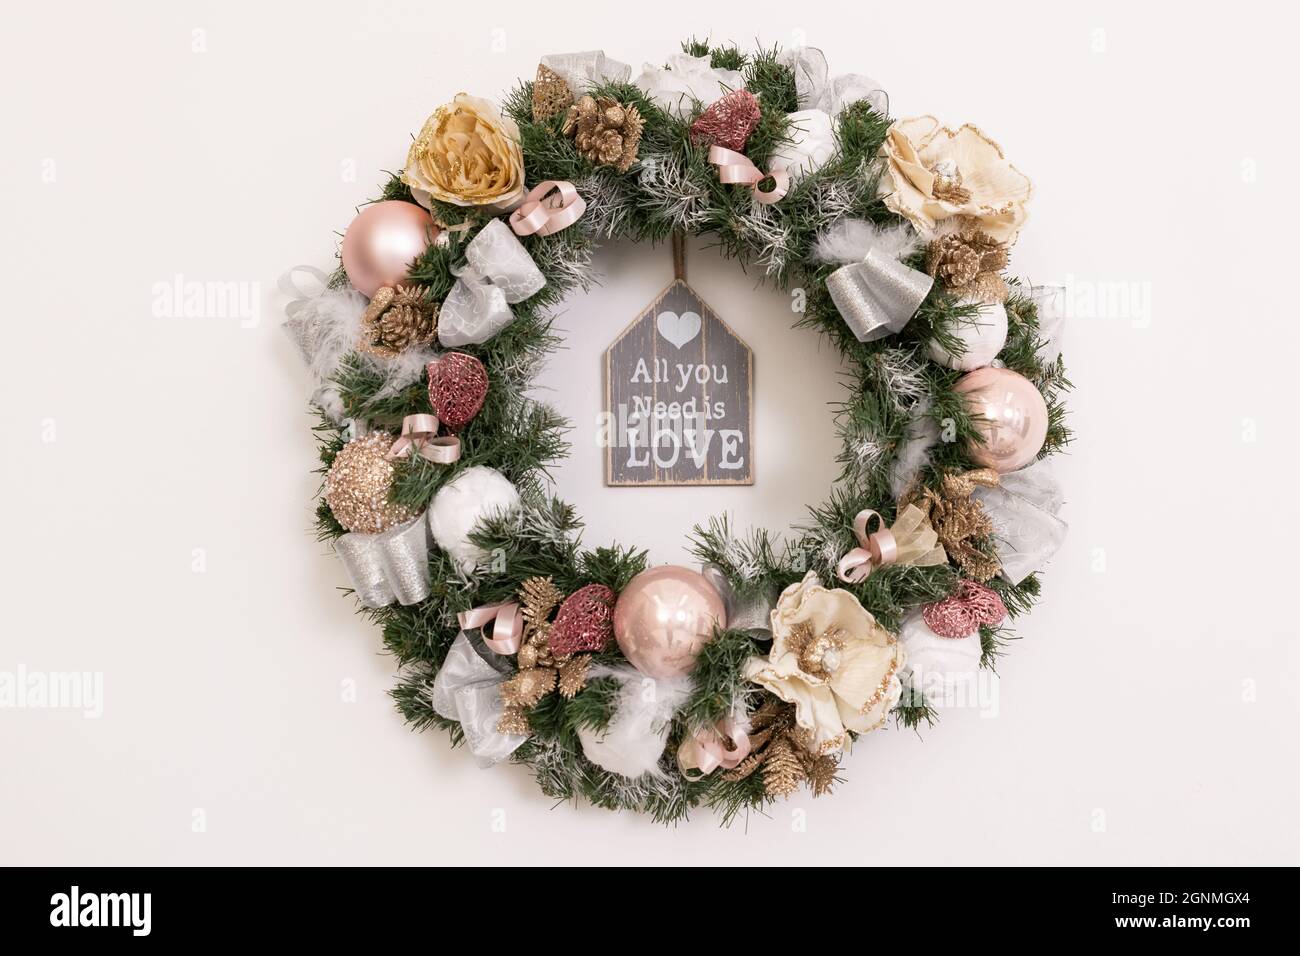 New Year's wreath is on the wall Stock Photo